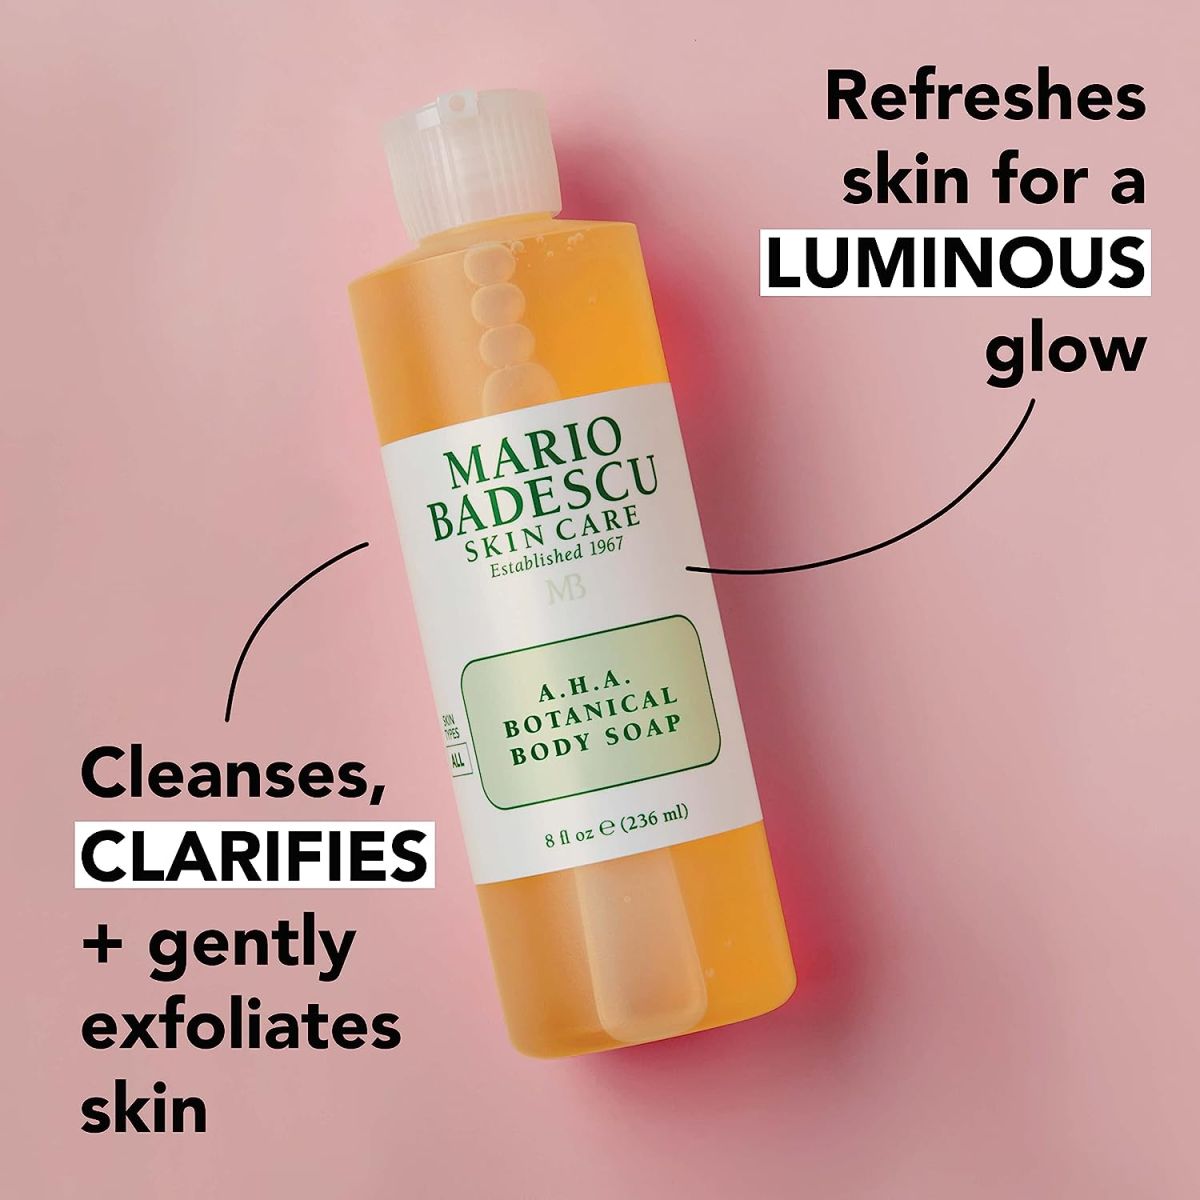 Mario Badescu AHA Botanical Body Wash Moisturizing, Clarifying and Gentle Exfoliating Body Wash for Brighter, Softer and Smoother Skin | Body Soap Infused with Glycolic Acid & Fruit Enzymes